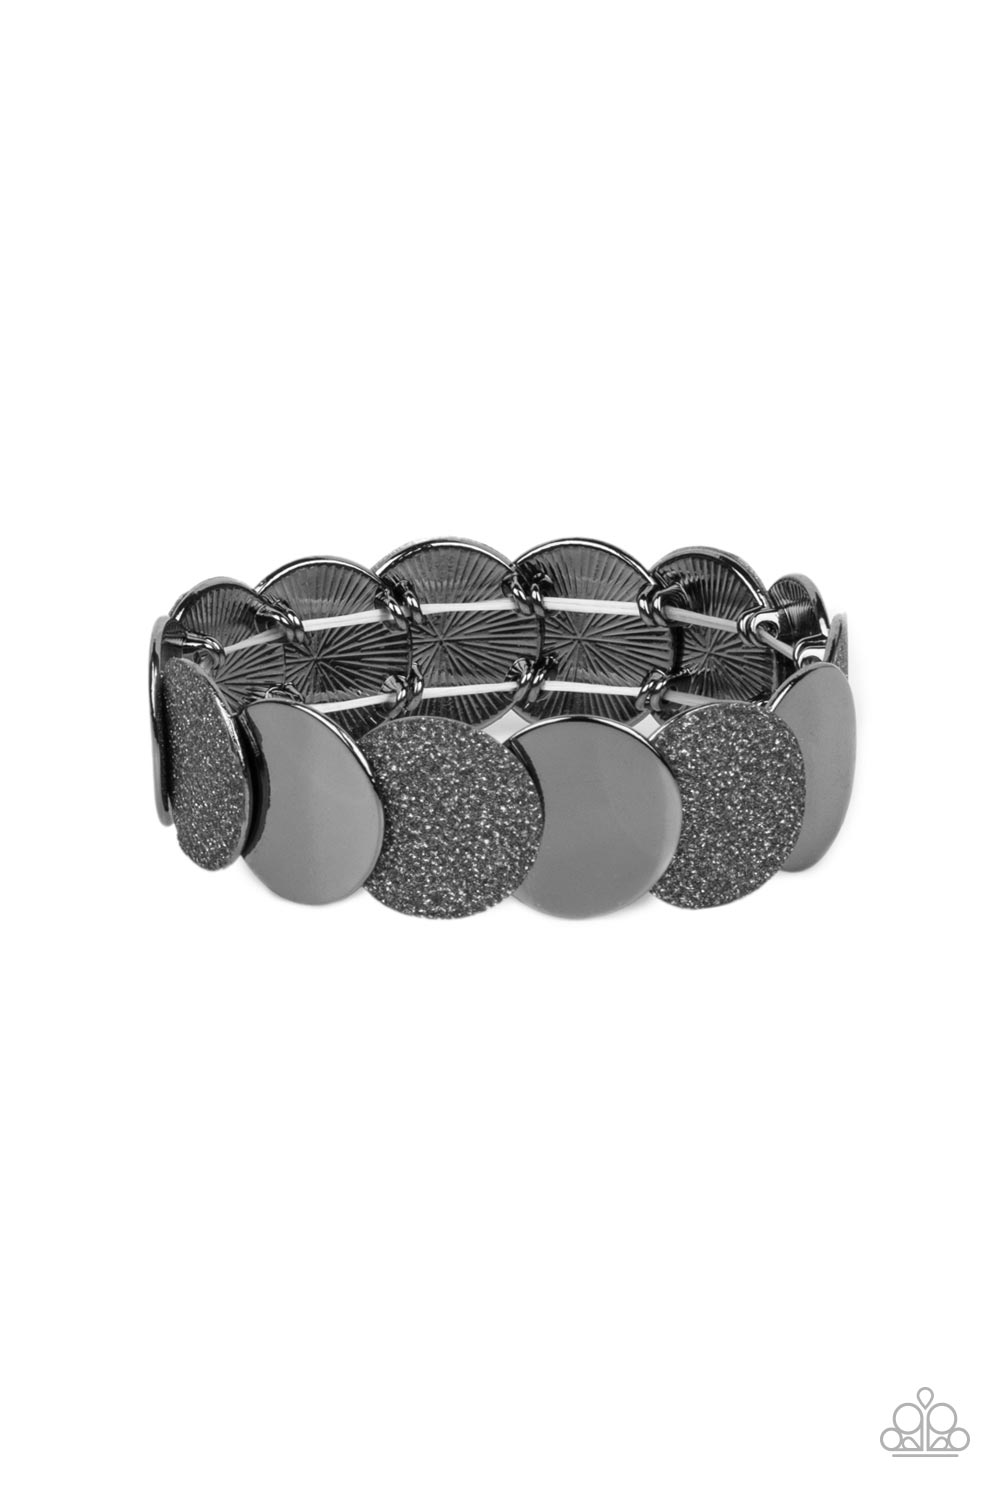 Demurely Disco - Black Item #P9BA-BKXX-089XX A glimmering collection of glistening gunmetal discs and glitter coated gunmetal discs delicately overlap along stretchy bands around the wrist, creating a dazzling hint of shimmer.  Sold as one individual bracelet.